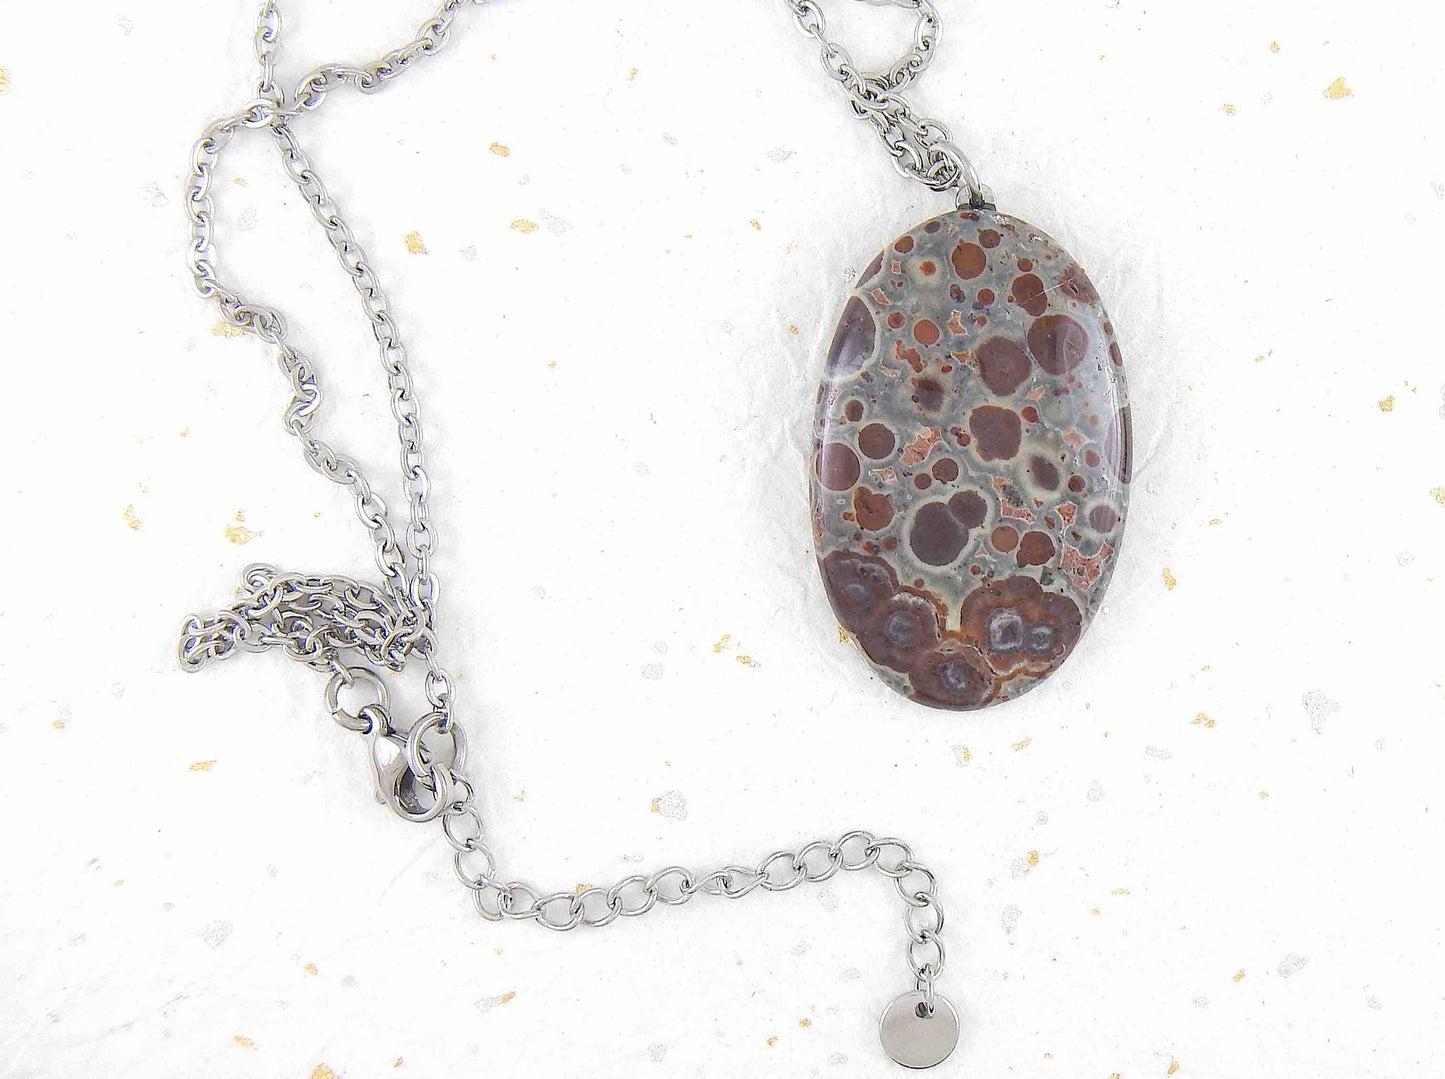 16-inch necklace with oval leopard jasper stone pendant, burgundy and chocolate brown dots on blue-grey background, stainless steel chain